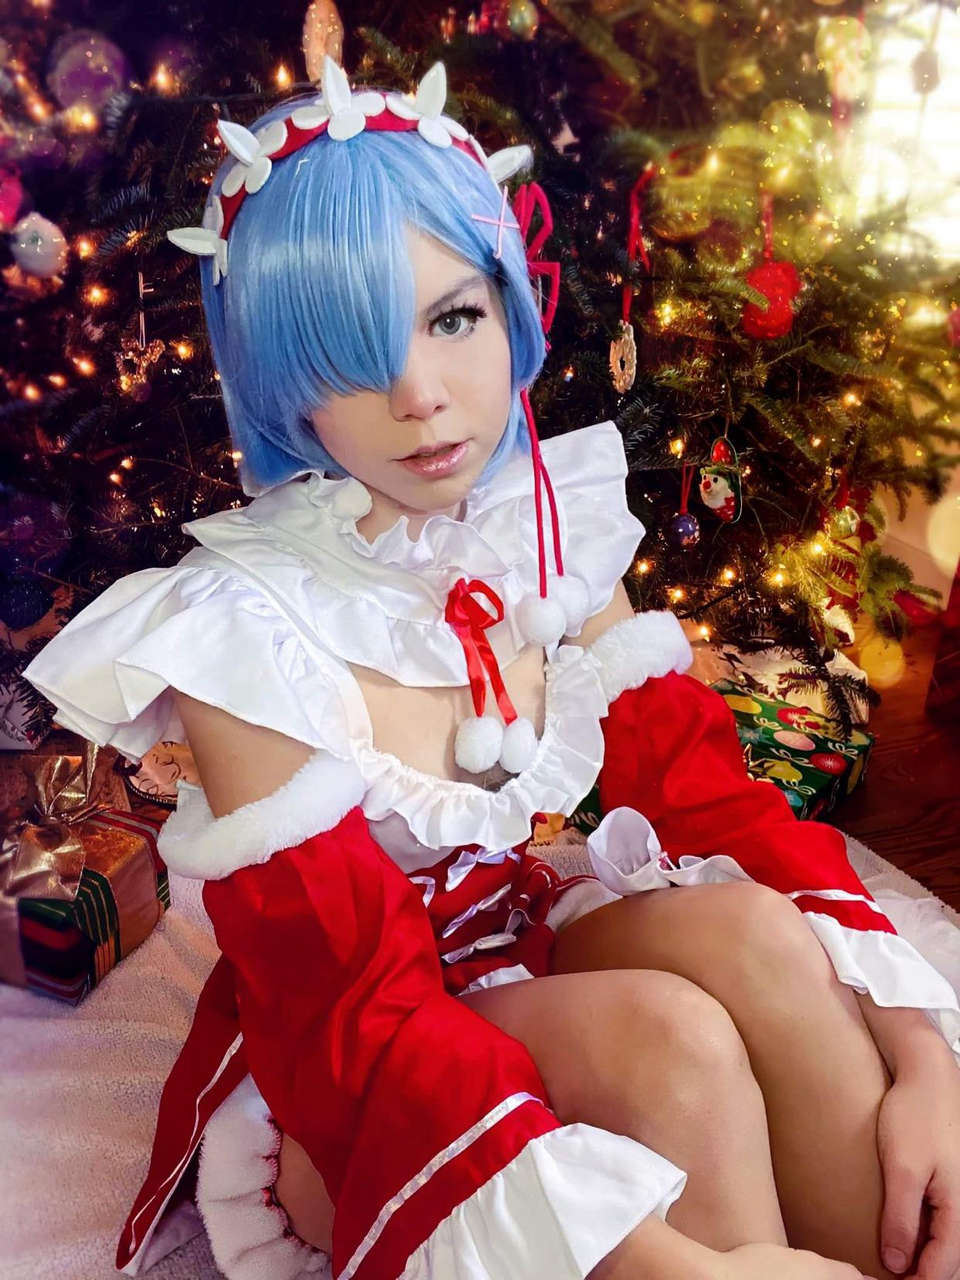 Christmas Rem From Re Zero By Electric Seafoa